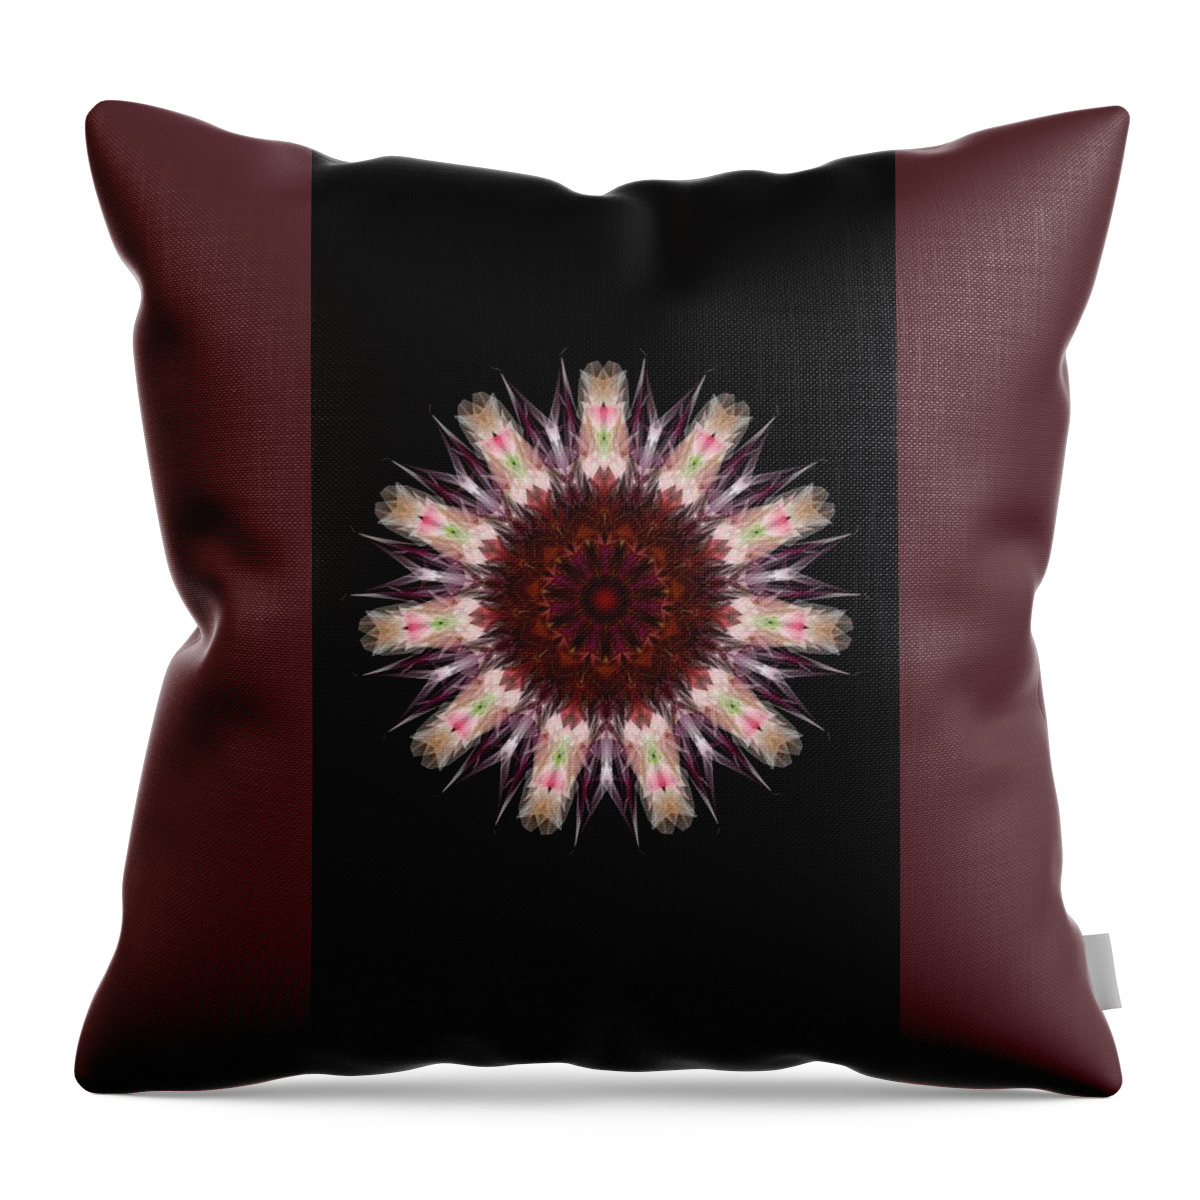 Kosmic Root Chakra Mandala Is A Mandala Based On The Chakra System That Can Be Used For Meditation And Healing. The Mandala Is Composed Of Seven Concentric Circles Representing Each Of The Seven Chakras Throw Pillow featuring the digital art Kosmic Root Chakra Mandala by Michael Canteen